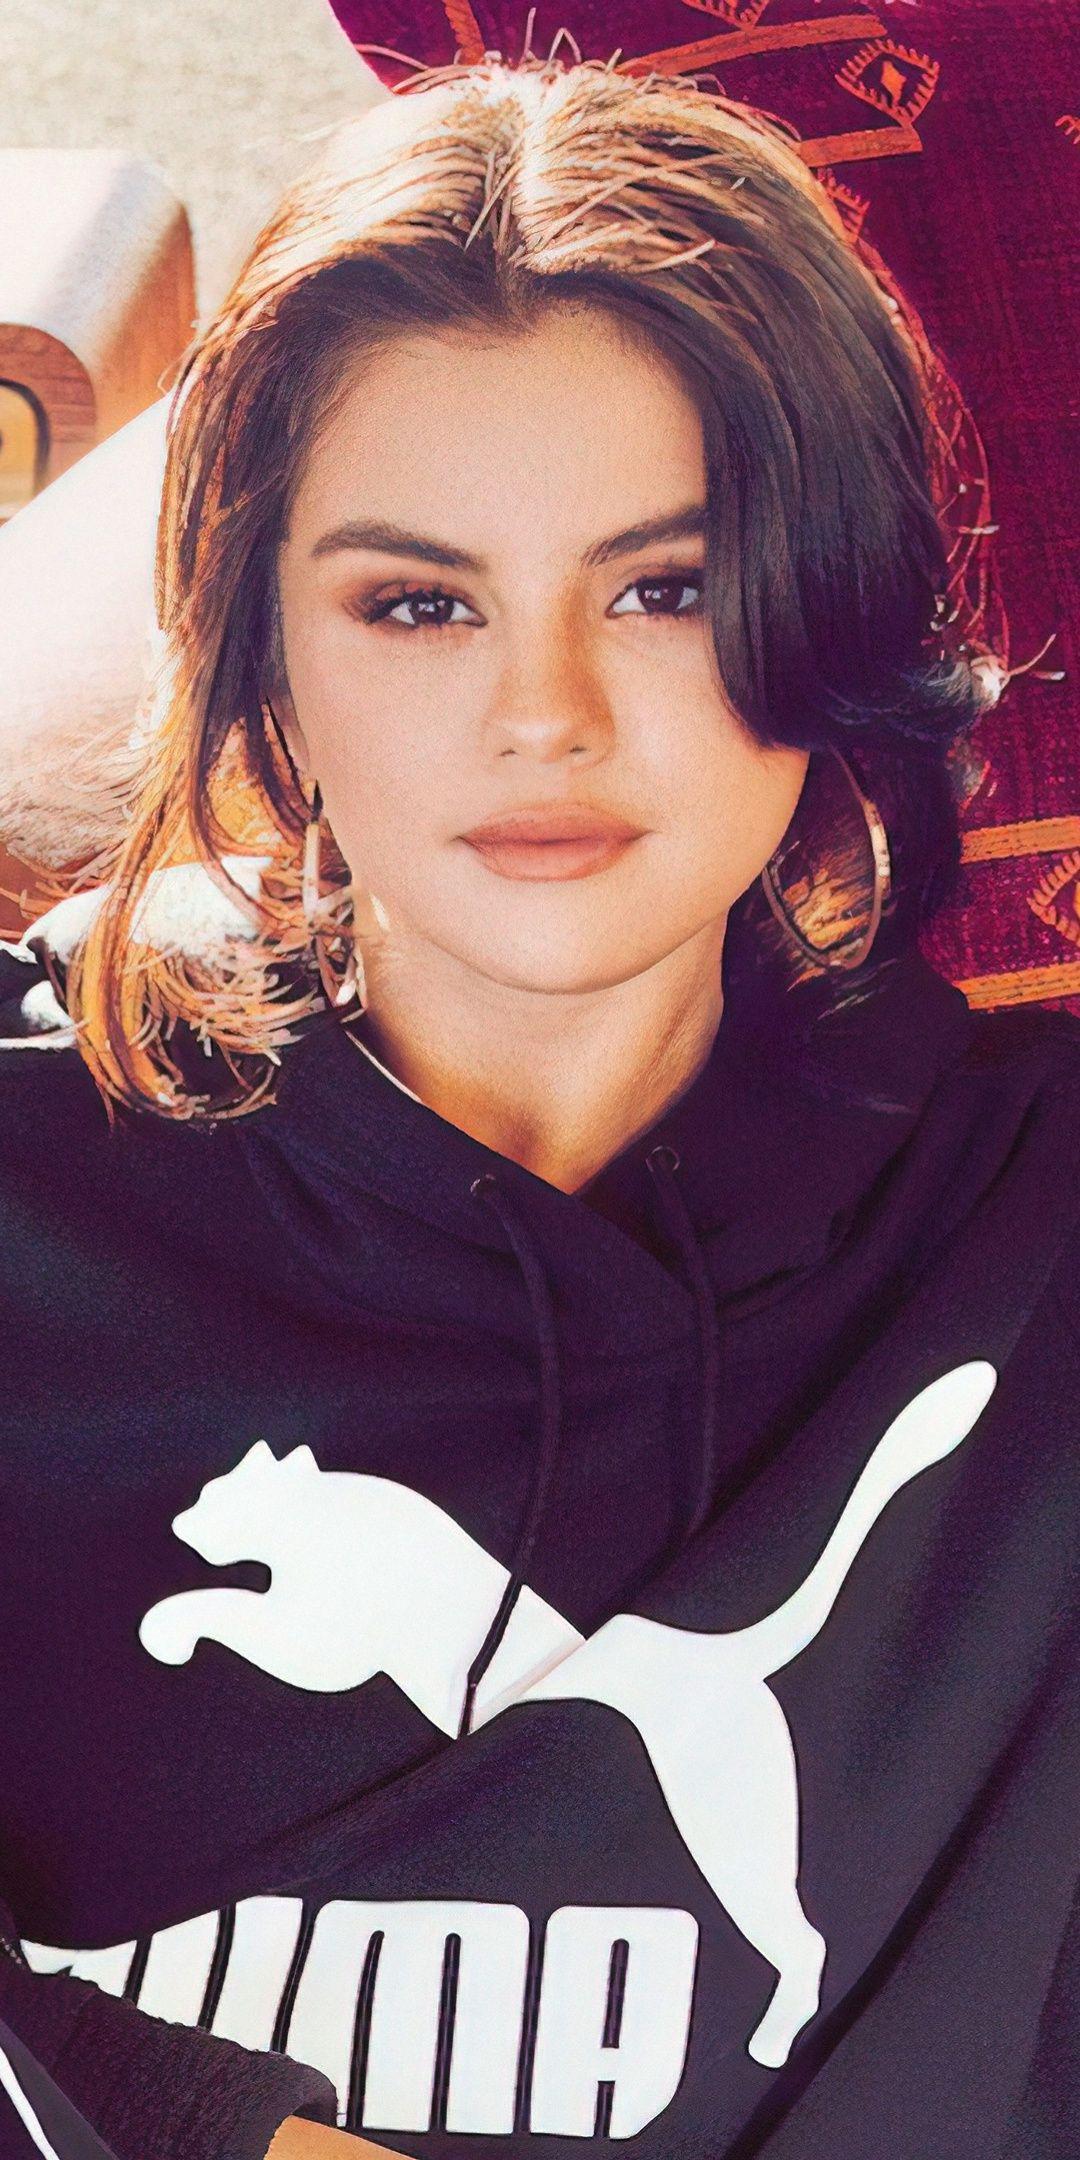 Selena Gomez HD Wallpapers | Latest Selena Gomez Wallpapers HD Free  Download (1080p to 2K) - FilmiBeat